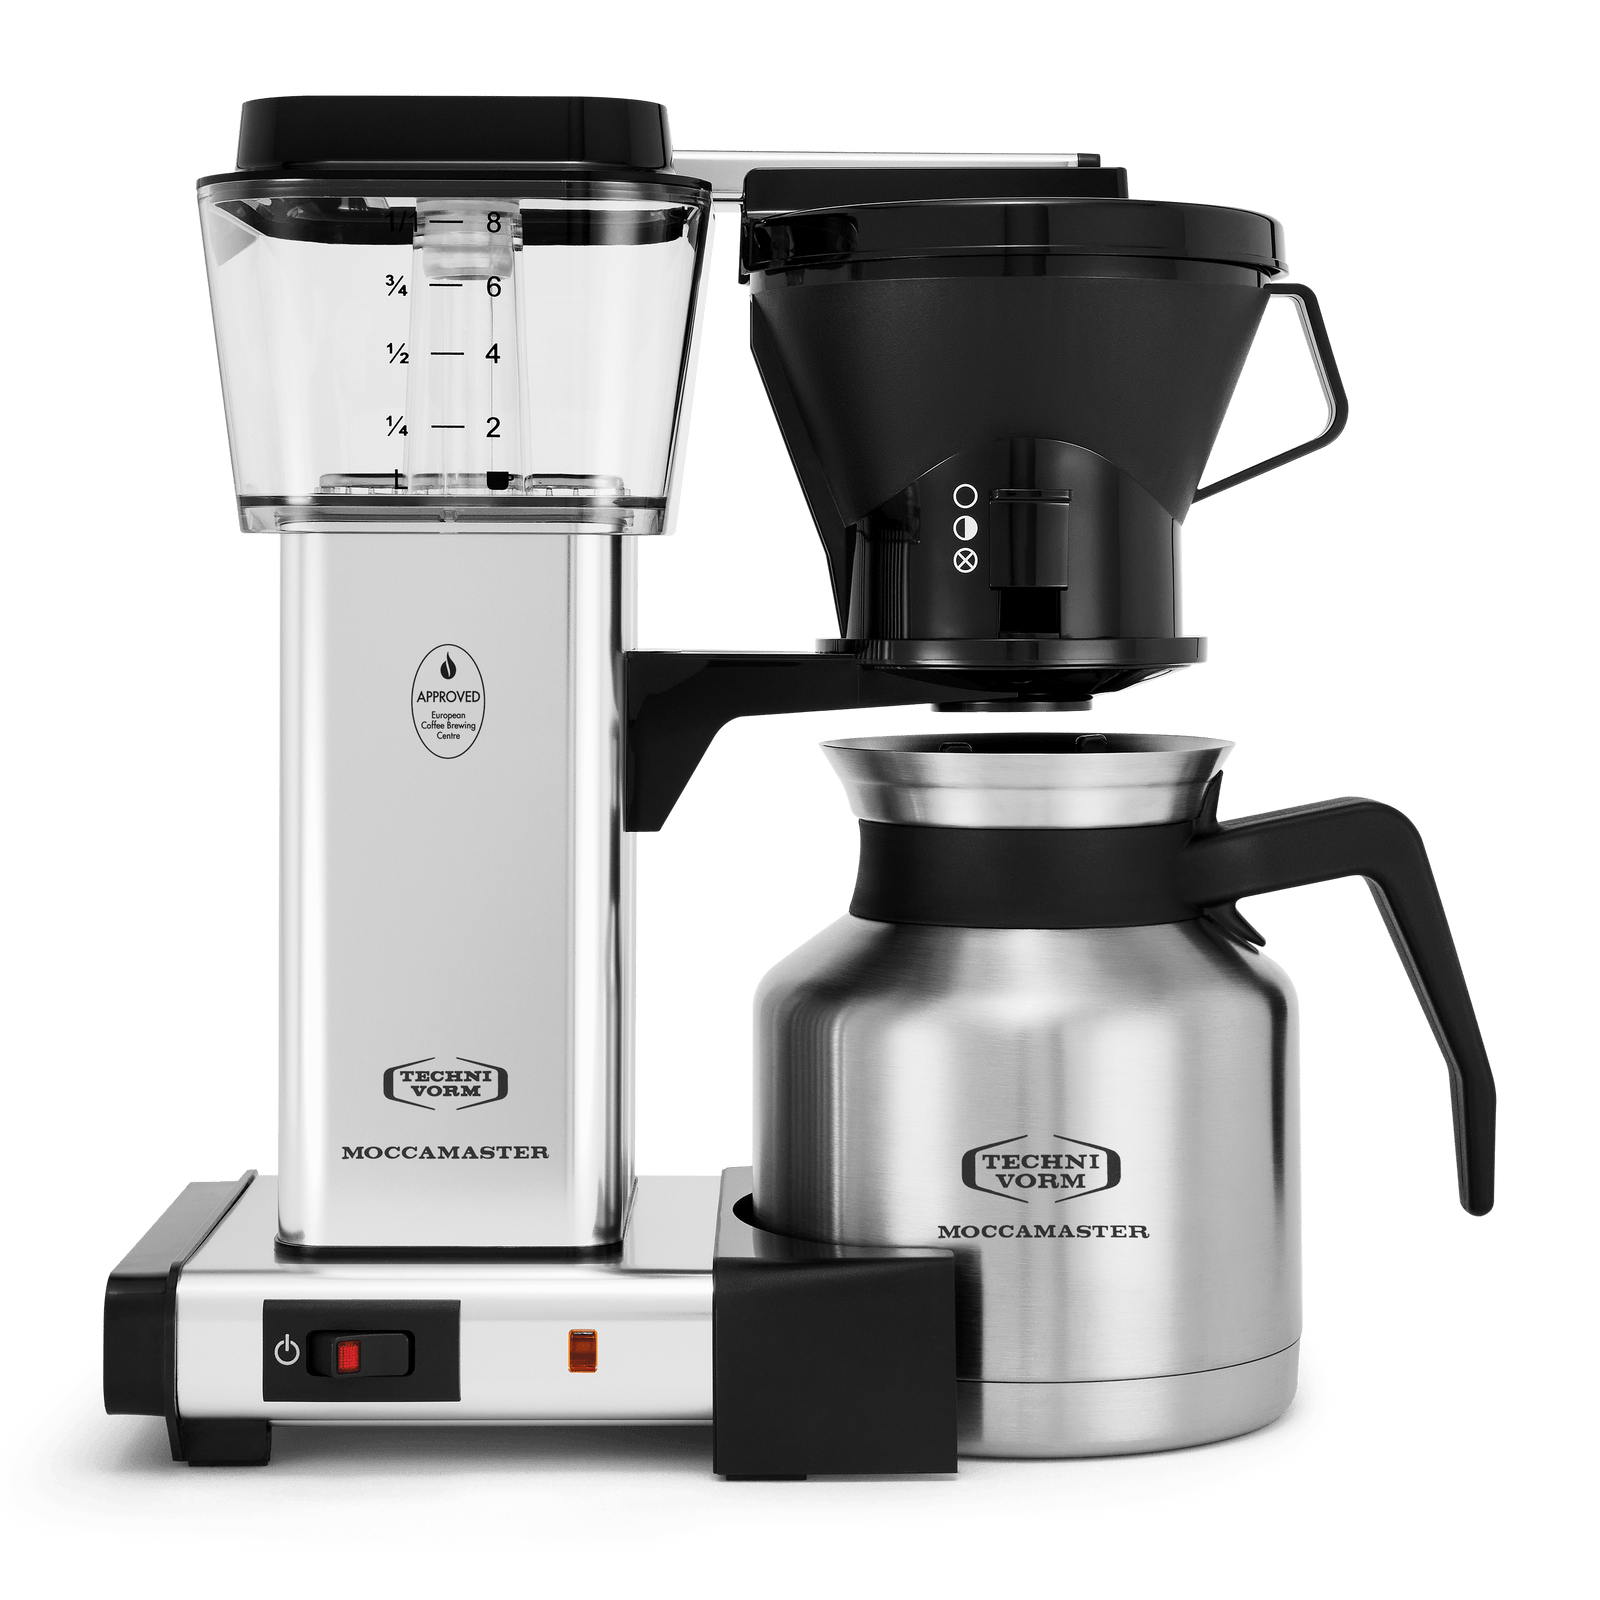 Omcan Stainless Steel Coffee Maker with 2 Liter Thermal Carafe